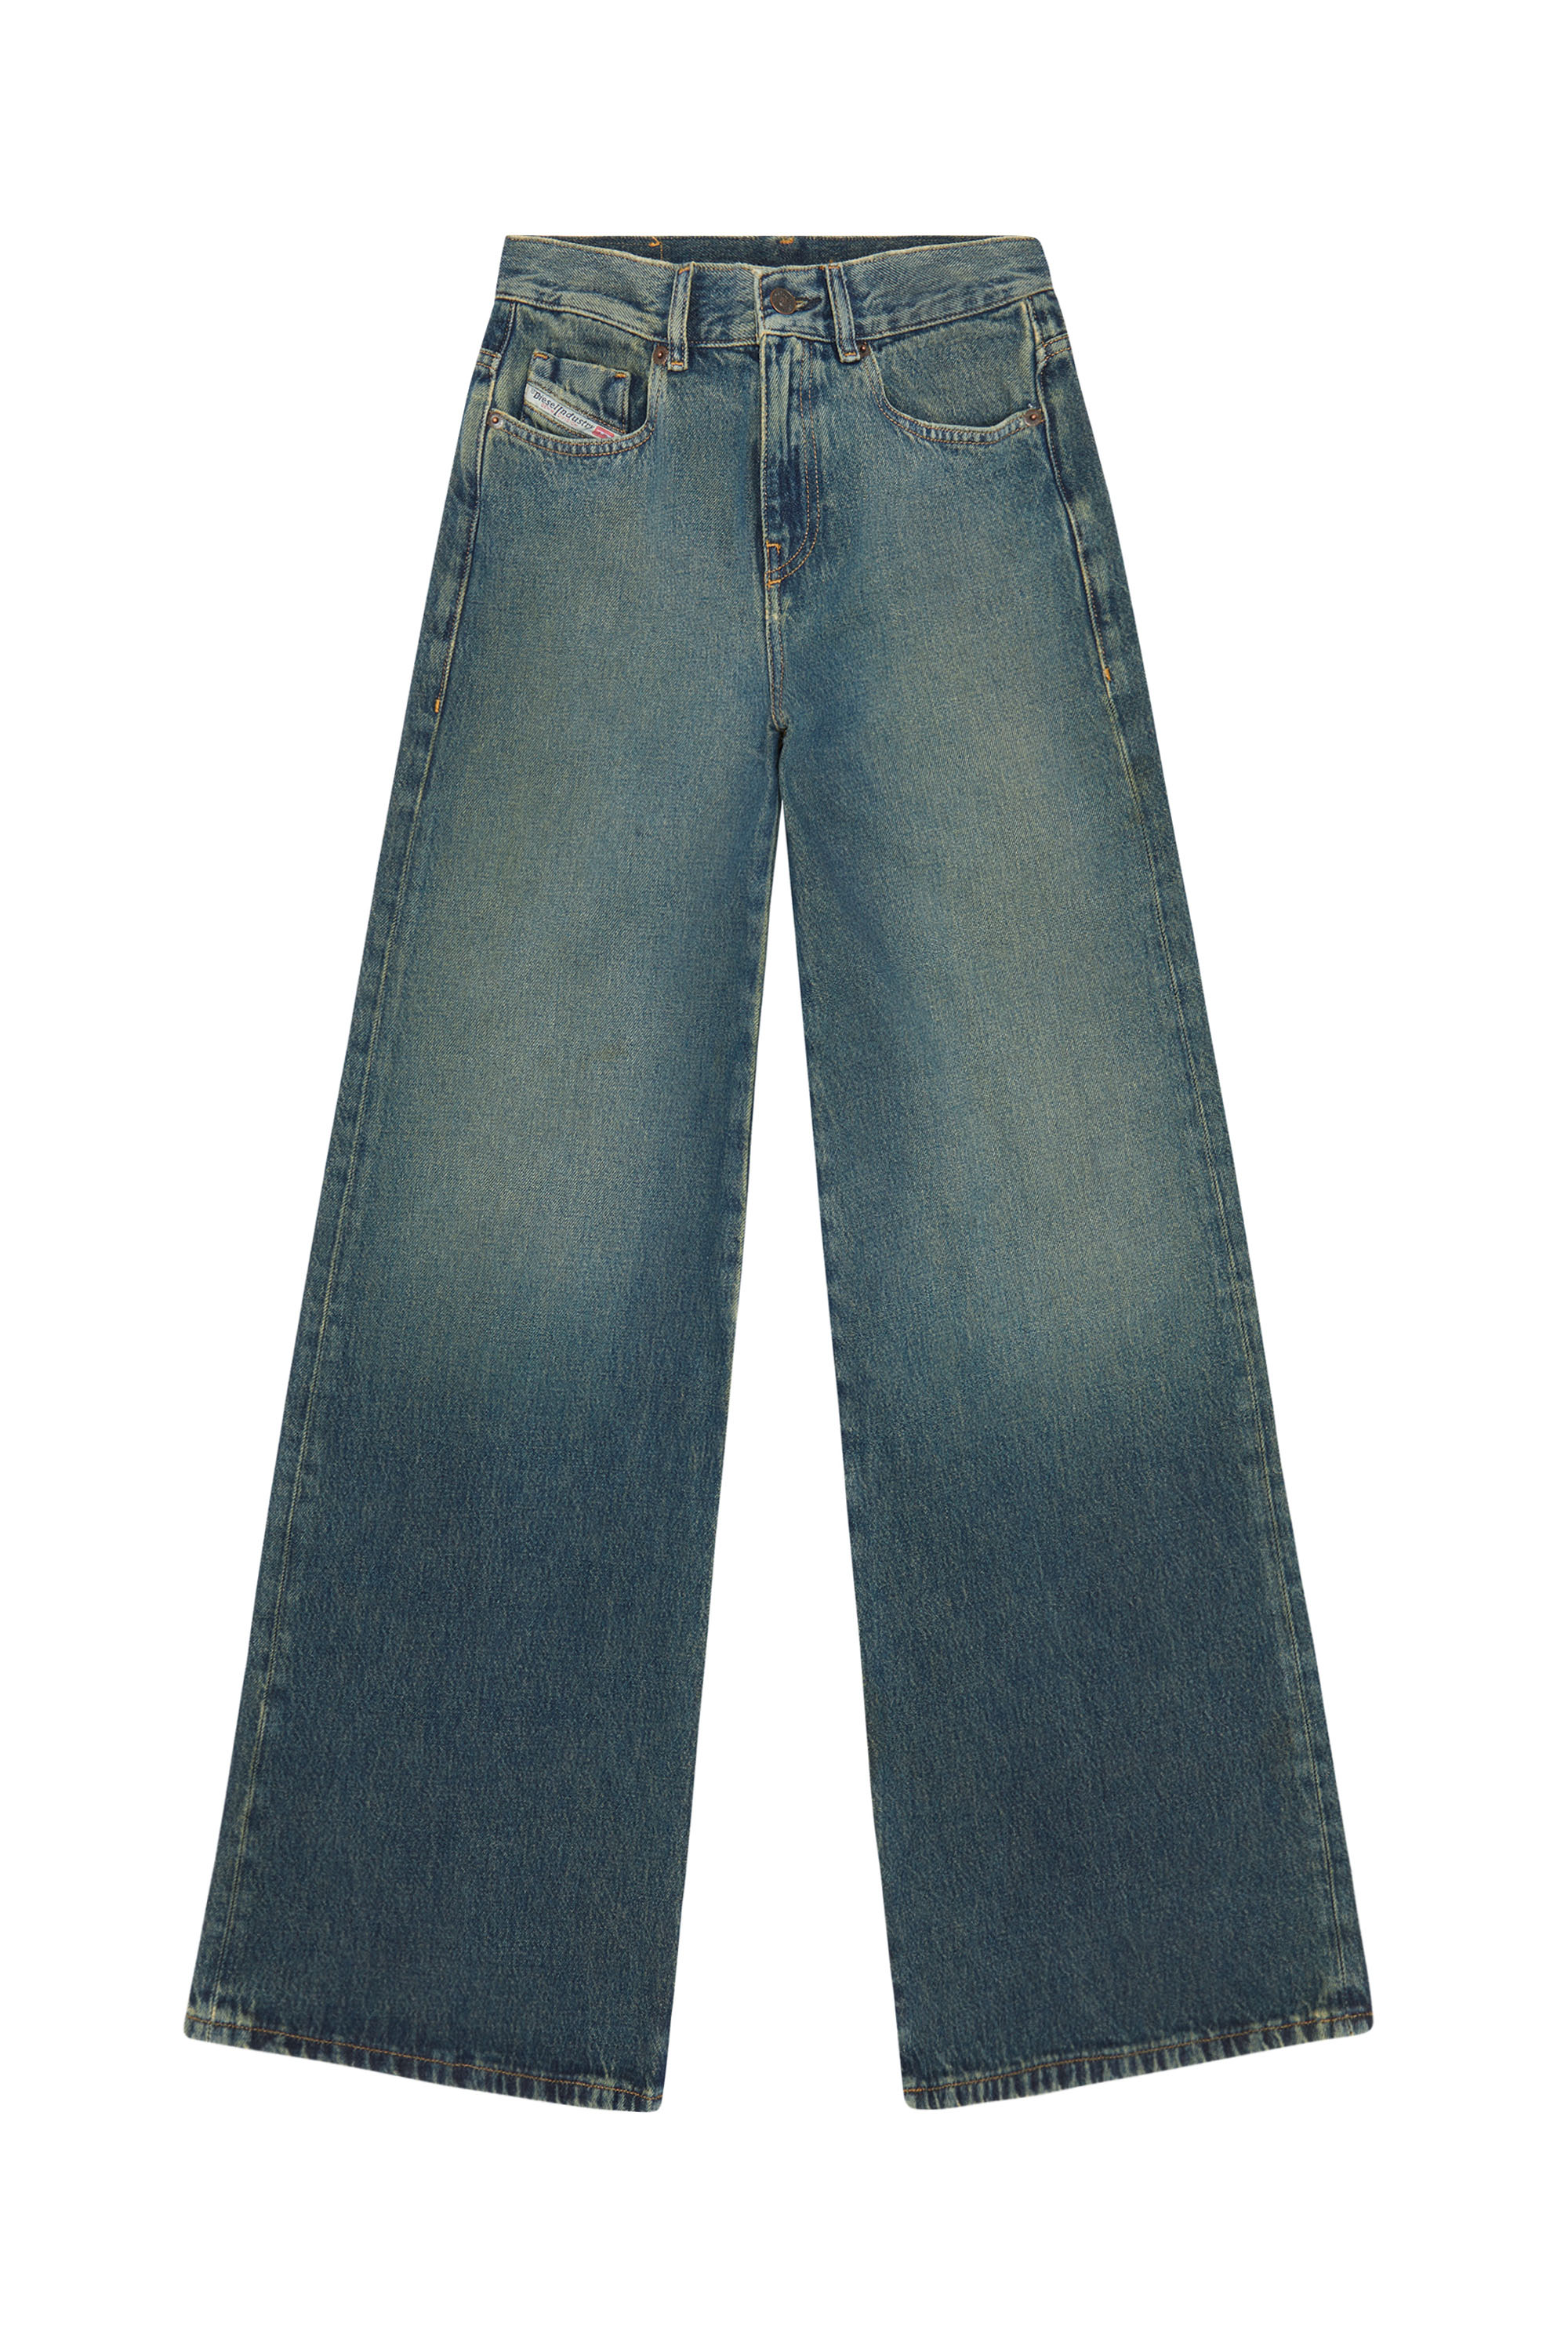 Diesel - 1978 09C04 Bootcut and Flare Jeans,  - Image 6